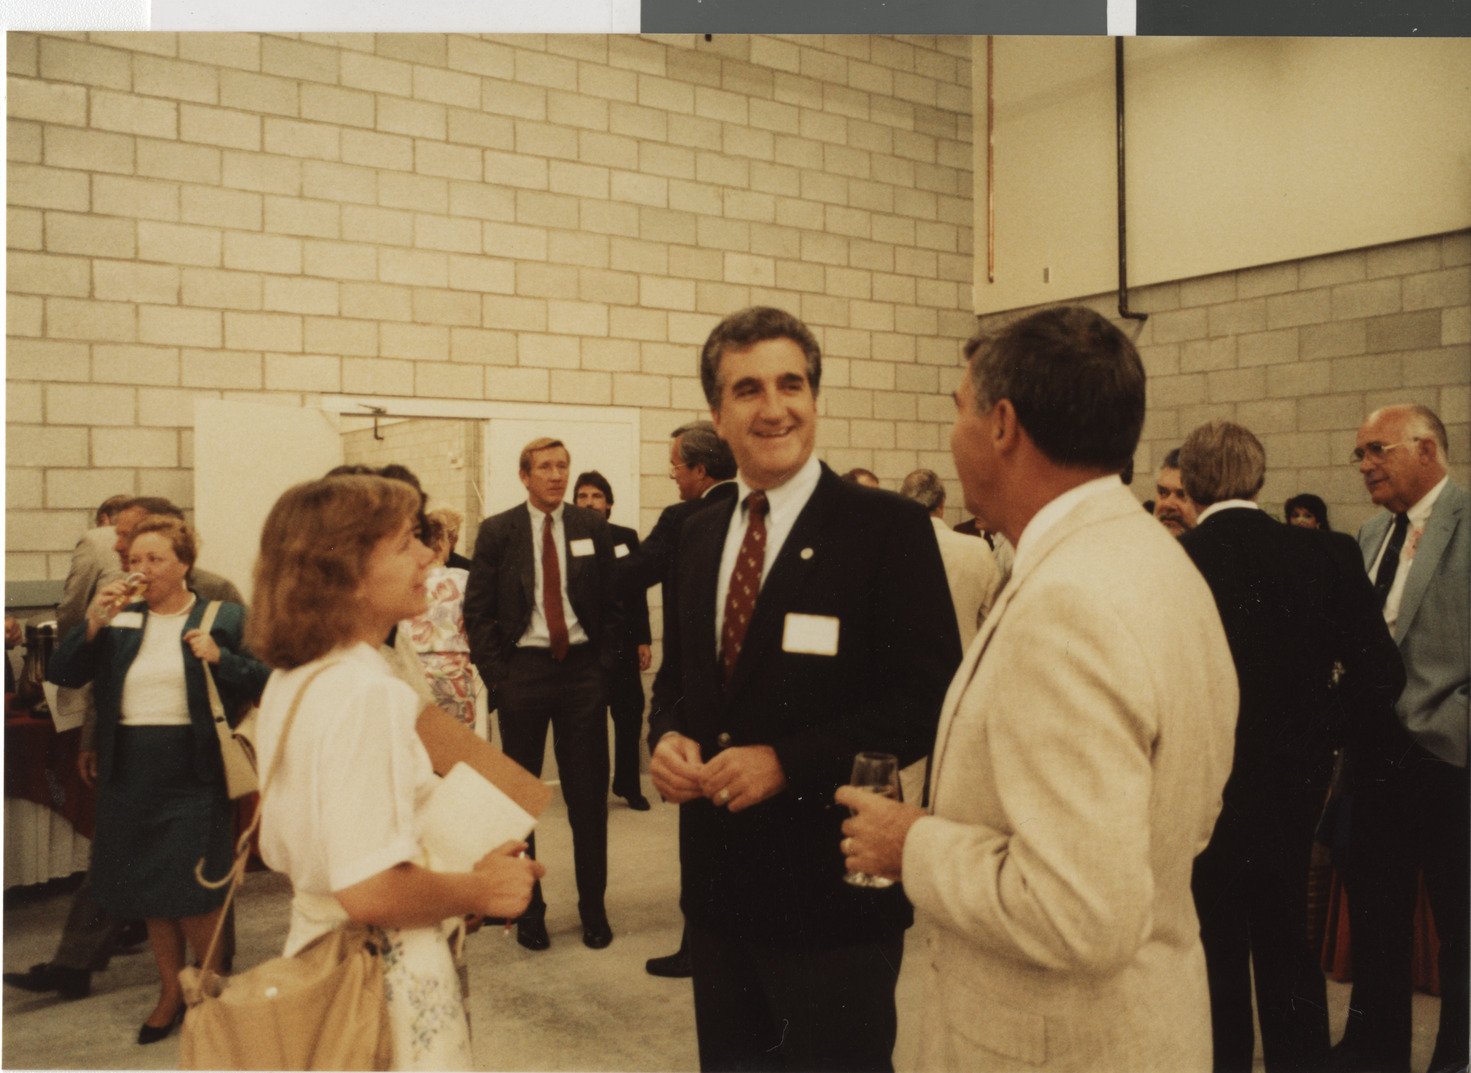 Photograph of Ron Lurie at an event, circa 1978